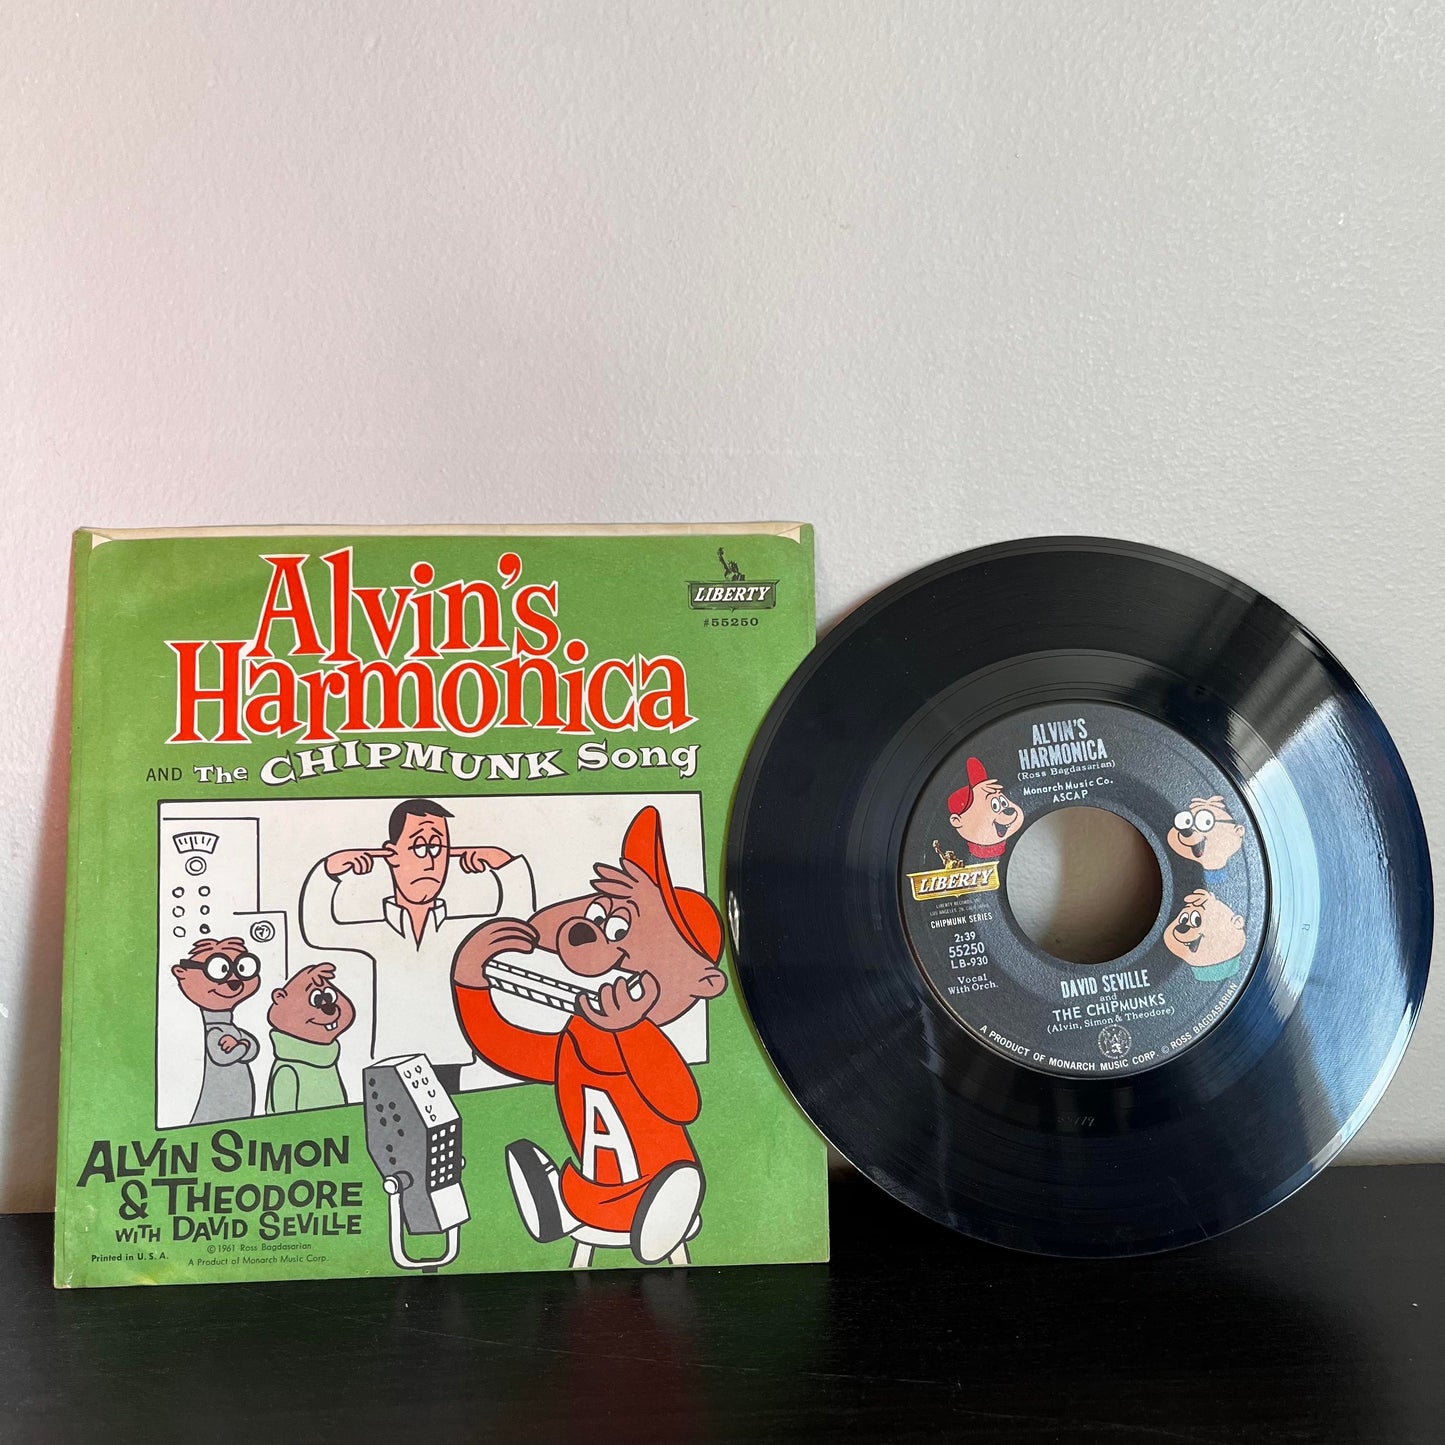 The Chipmunk Song Christmas Don't Be Late and Alvin's Harmonica 7" Liberty 55250 Vinyl NM